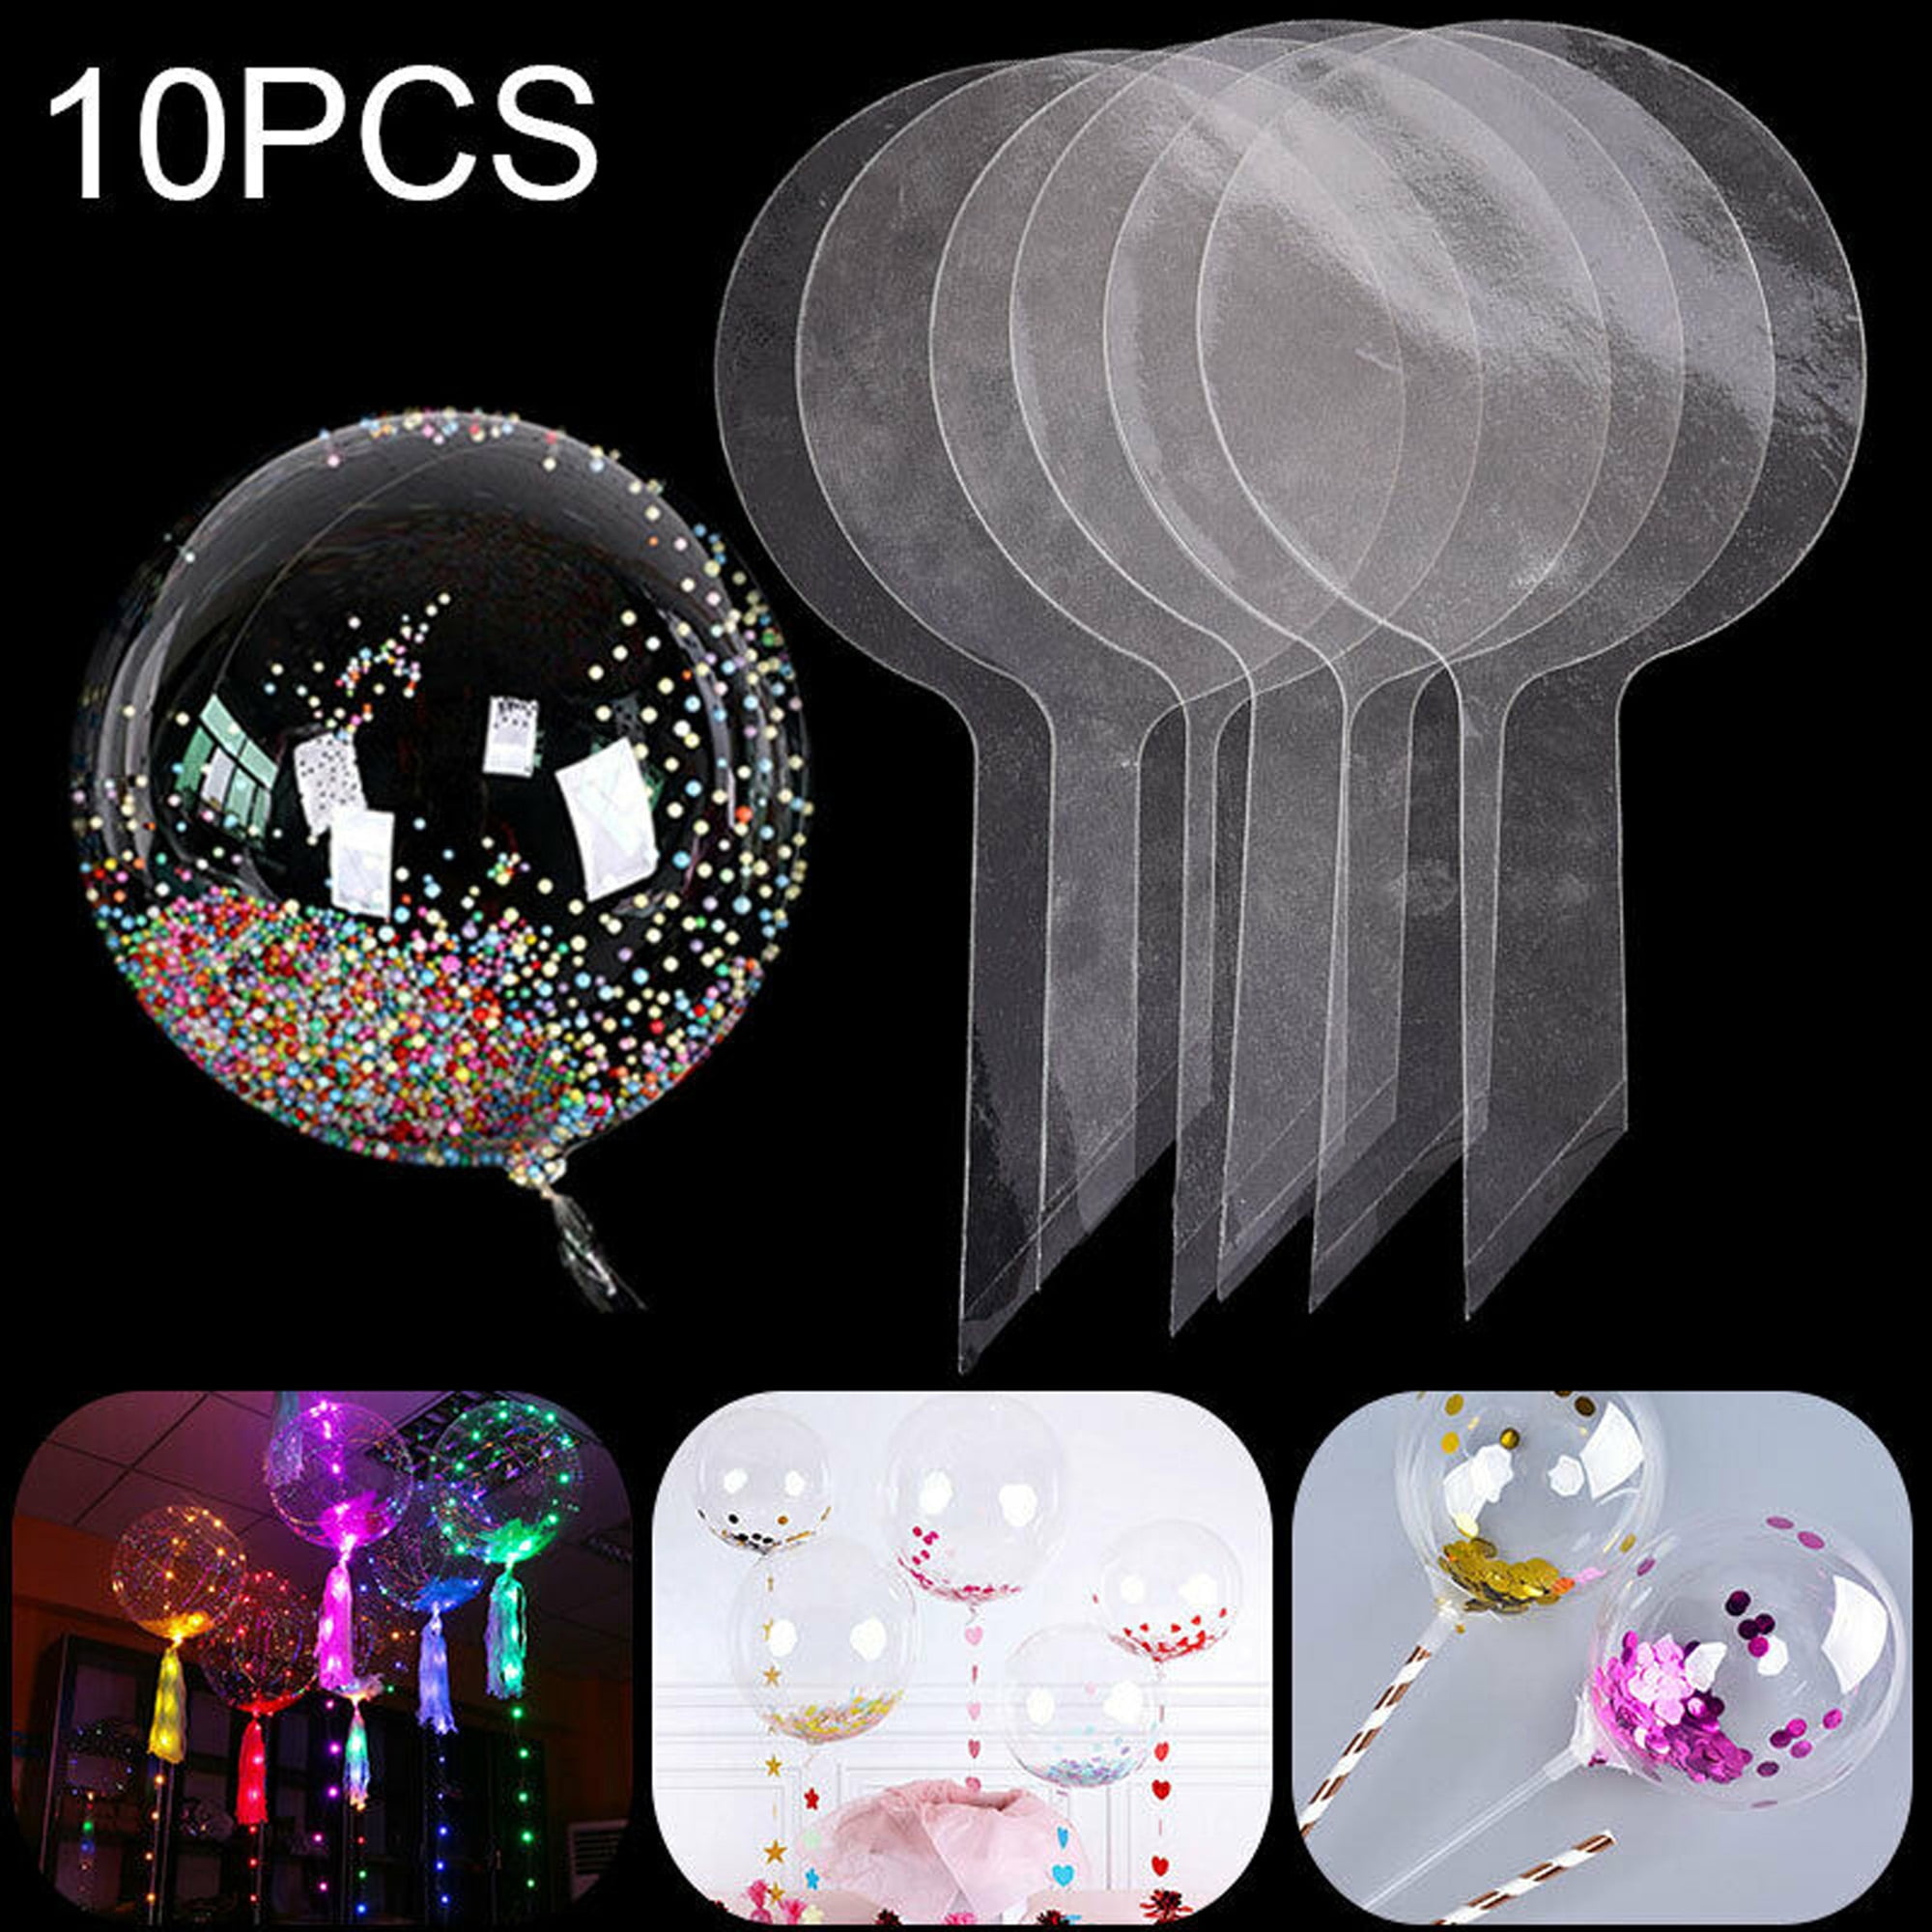 10pcs transparent clear bobo balloons no wrinkle marriage wedding party decor RC 